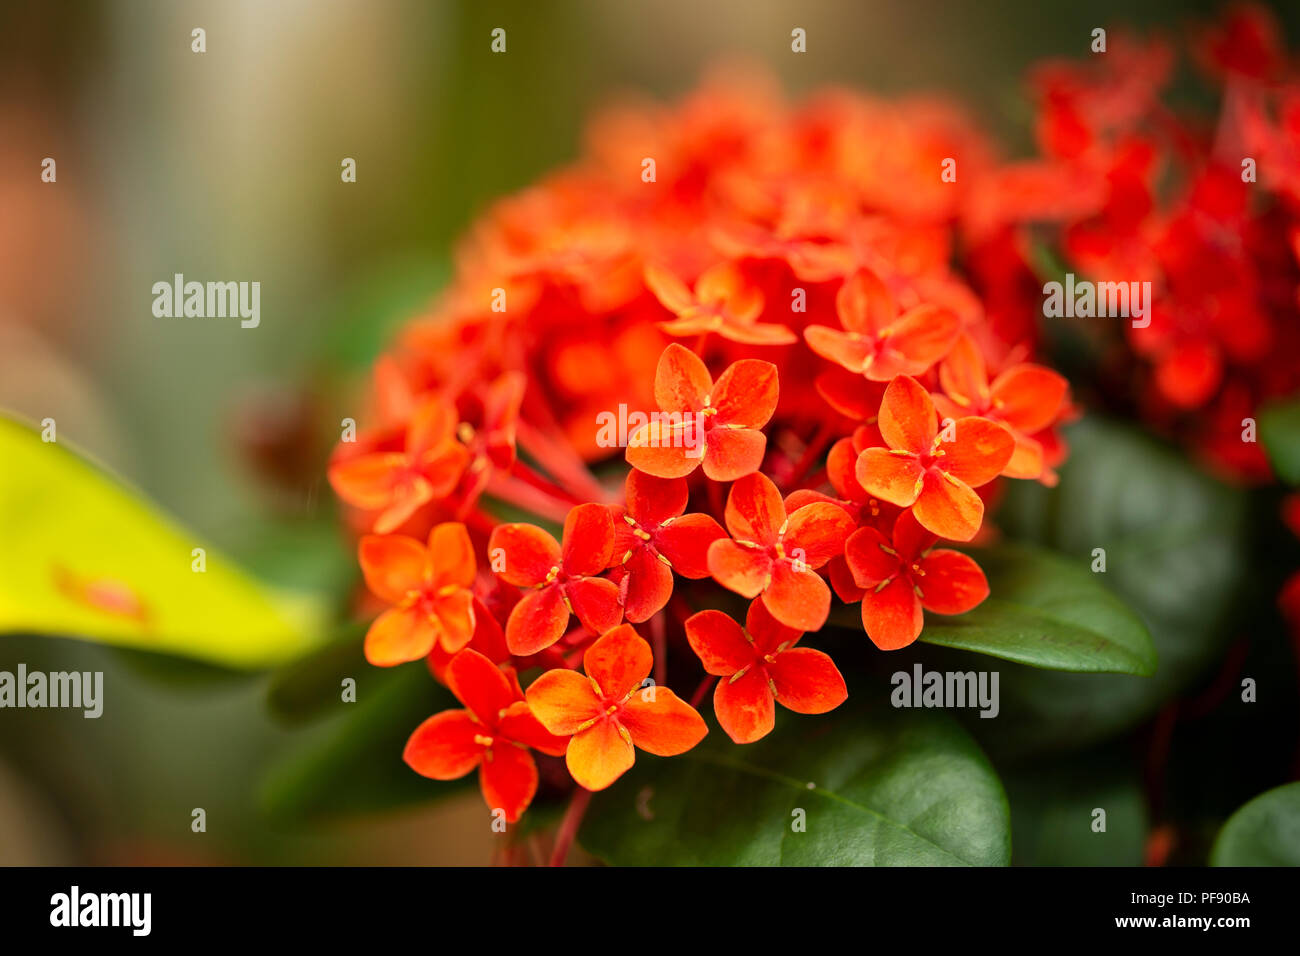 Ixora coccinea Maui, also known as flame of the woods, jungle geranium, or jungle flame, from the family Rubiaceae. Stock Photo